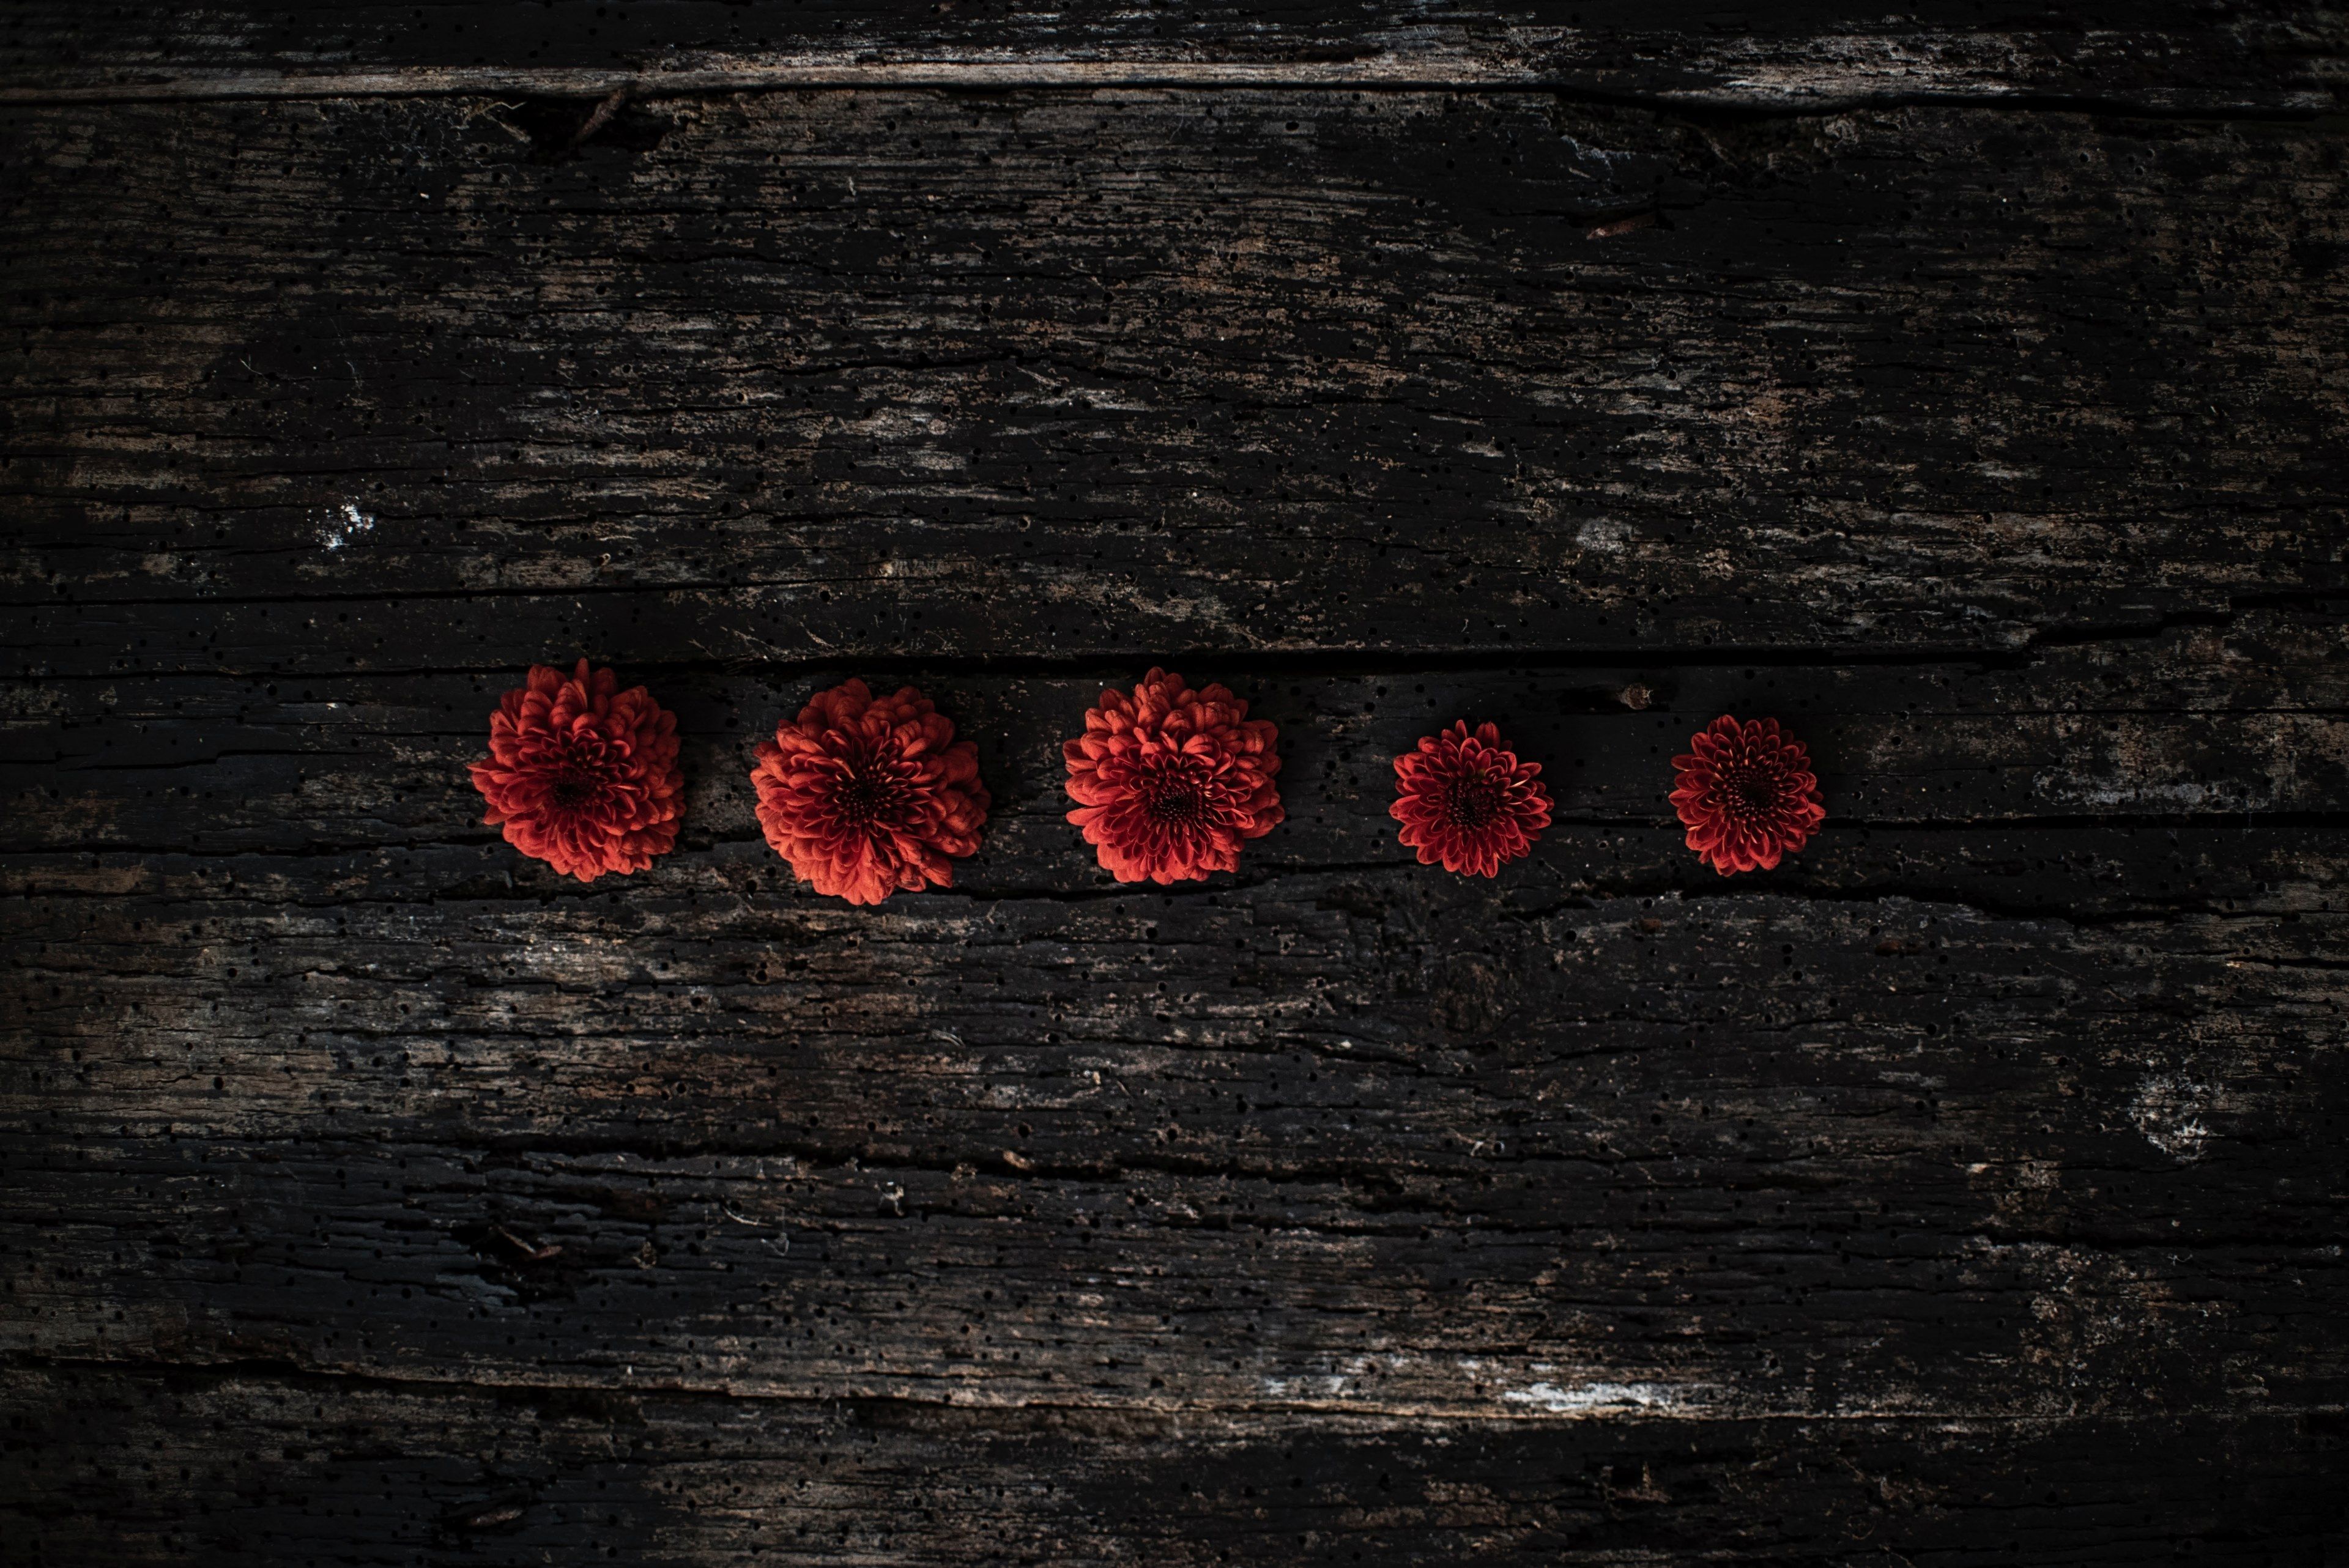 Red flowers on a wooden surface - Dark red